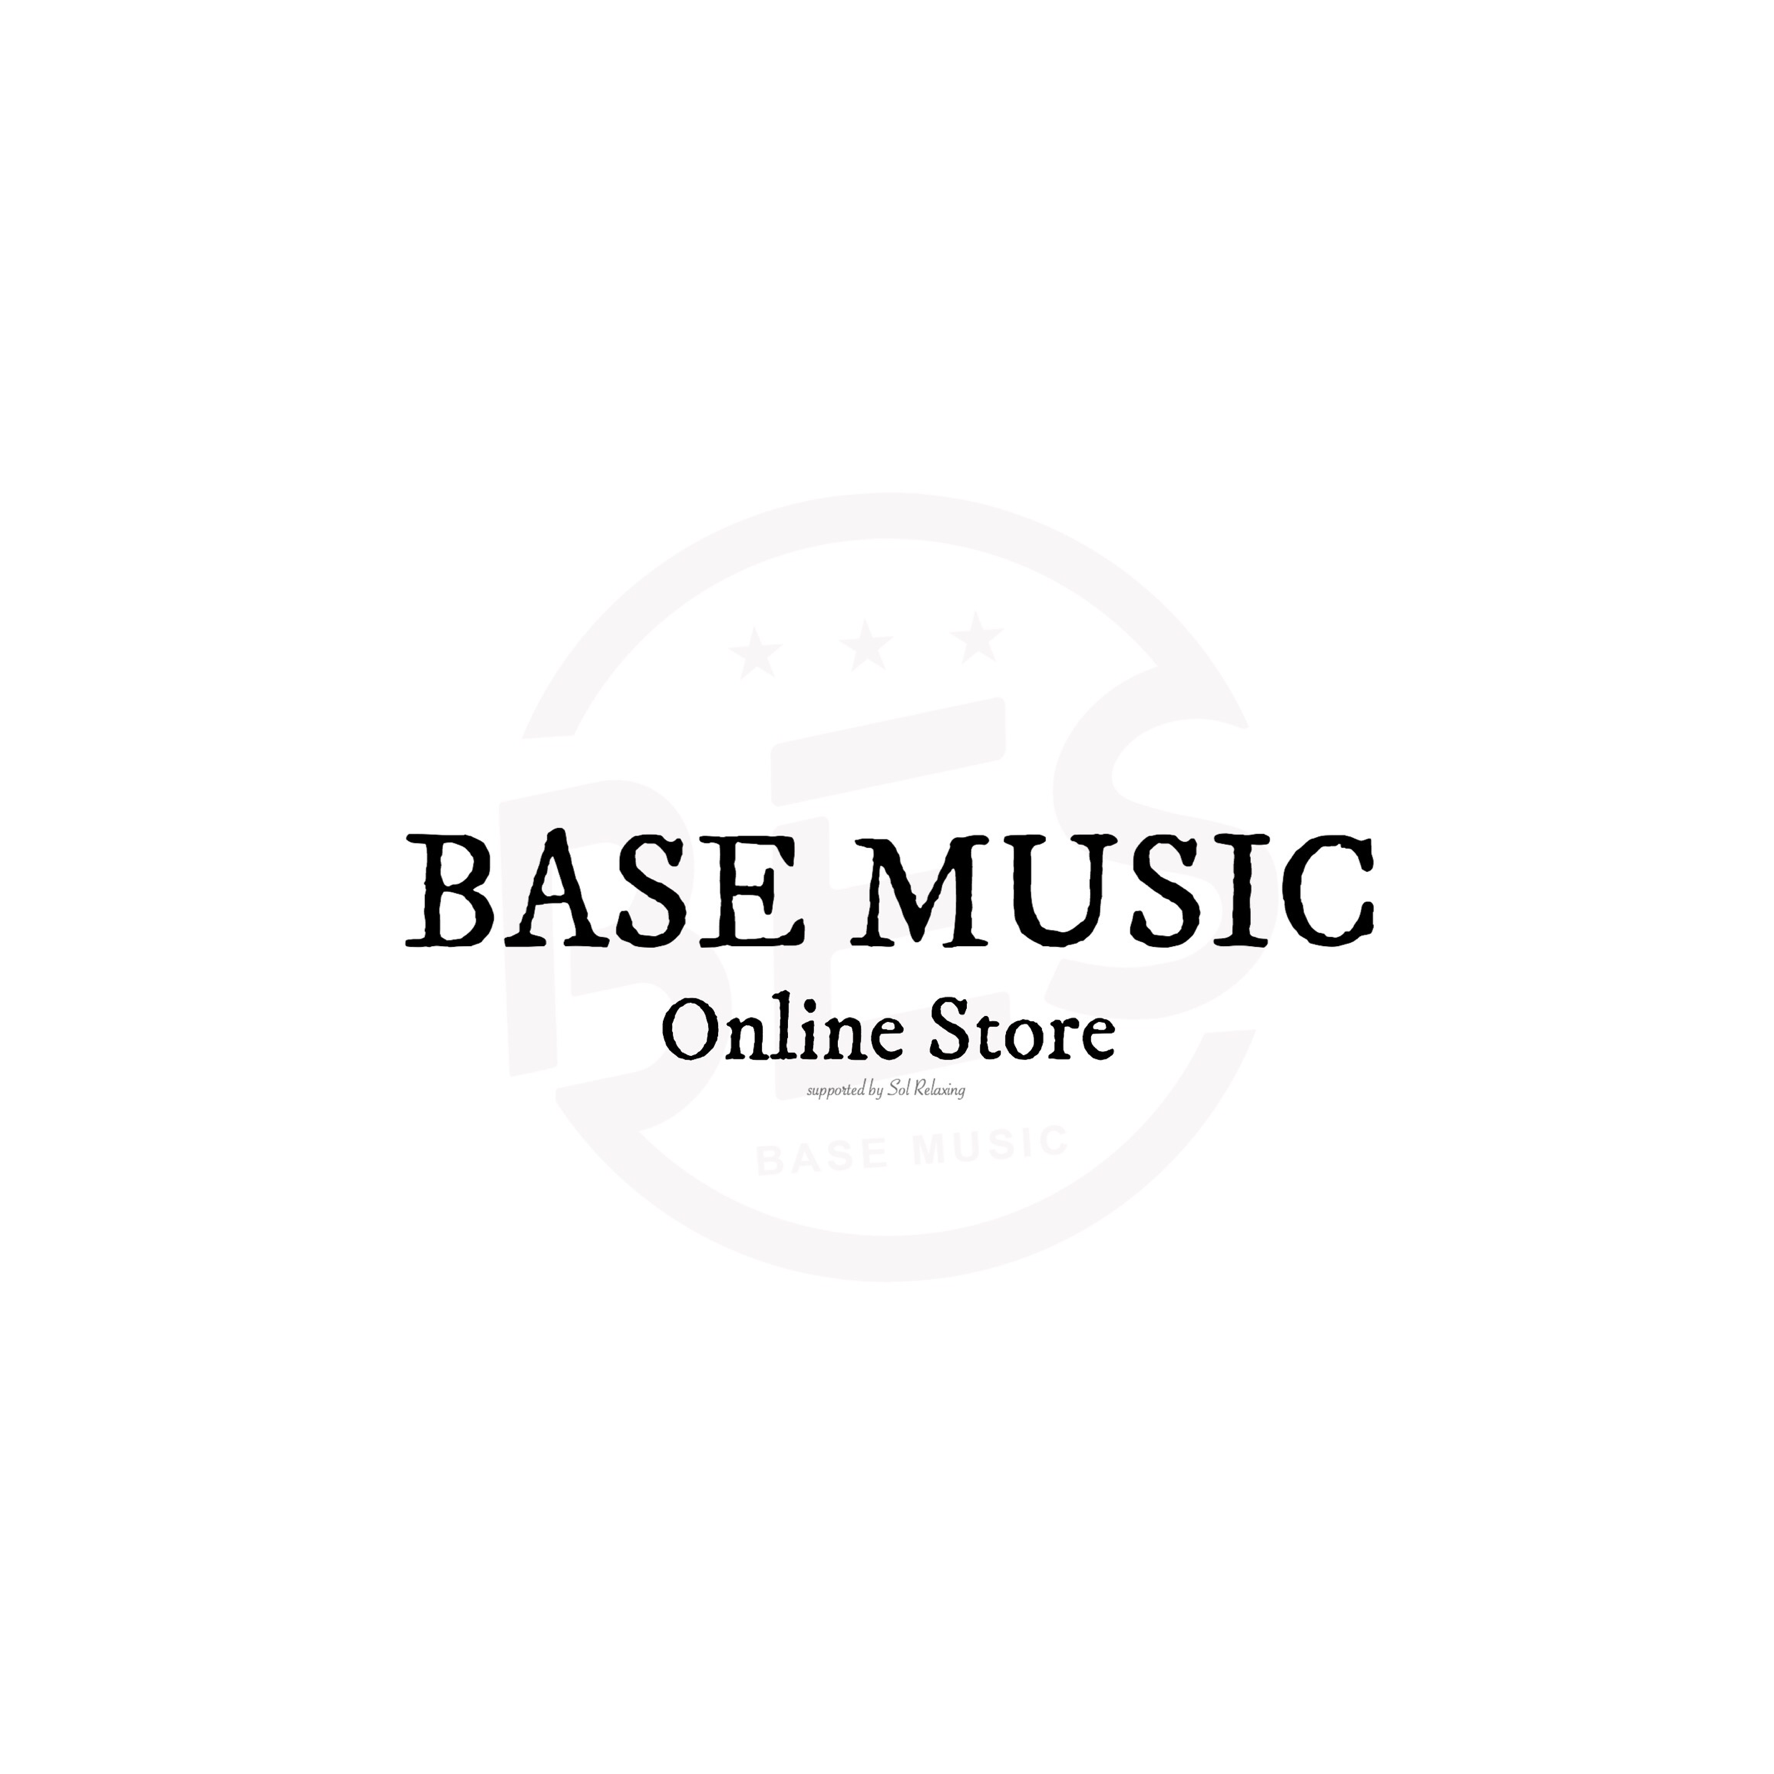 BASE MUSIC ONLINE STORE